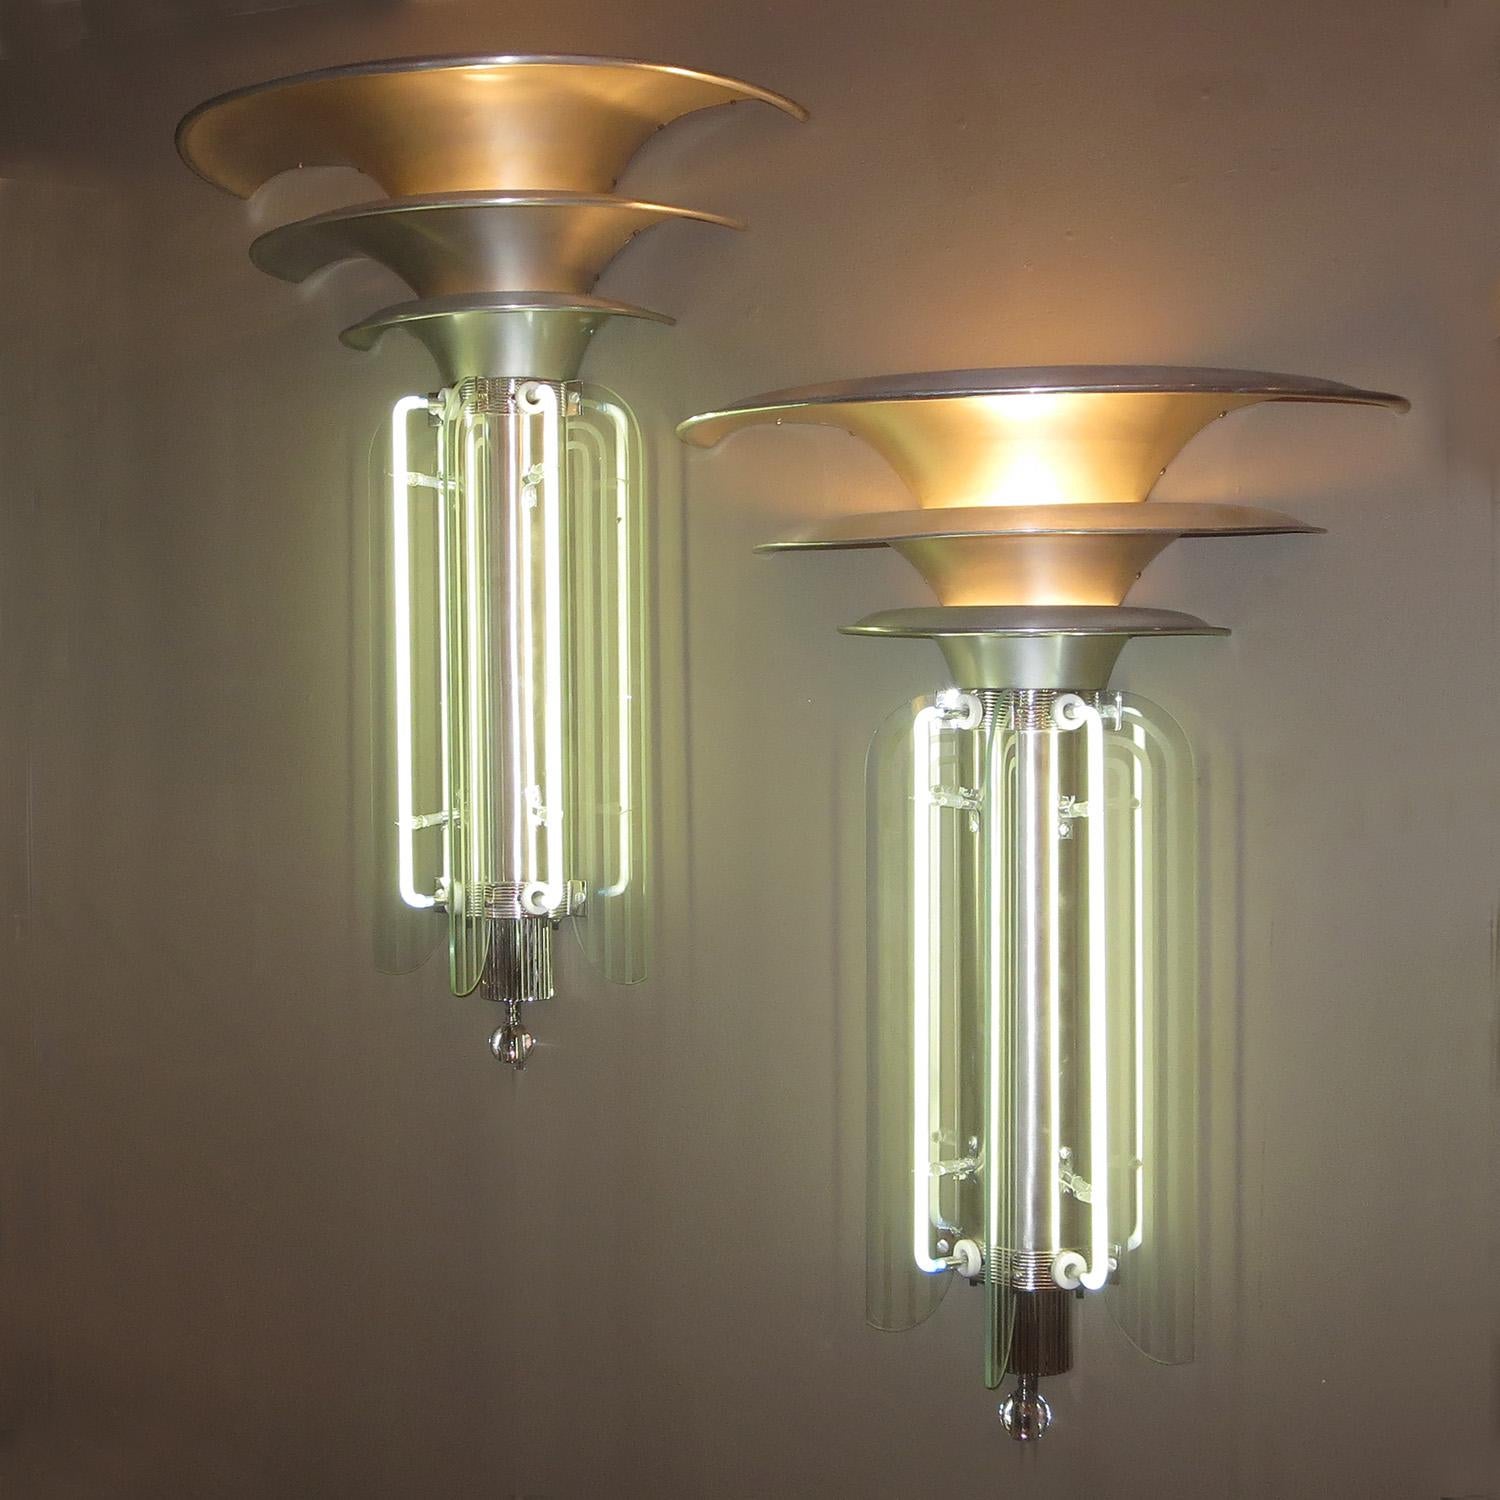 These wonderful sconces were originally from a Chicago area 1930s theatre. They utilized the most modern of materials and design, including bands of etched glass intersected with neon tubes. We have done a sensitive restoration to the lamps. The